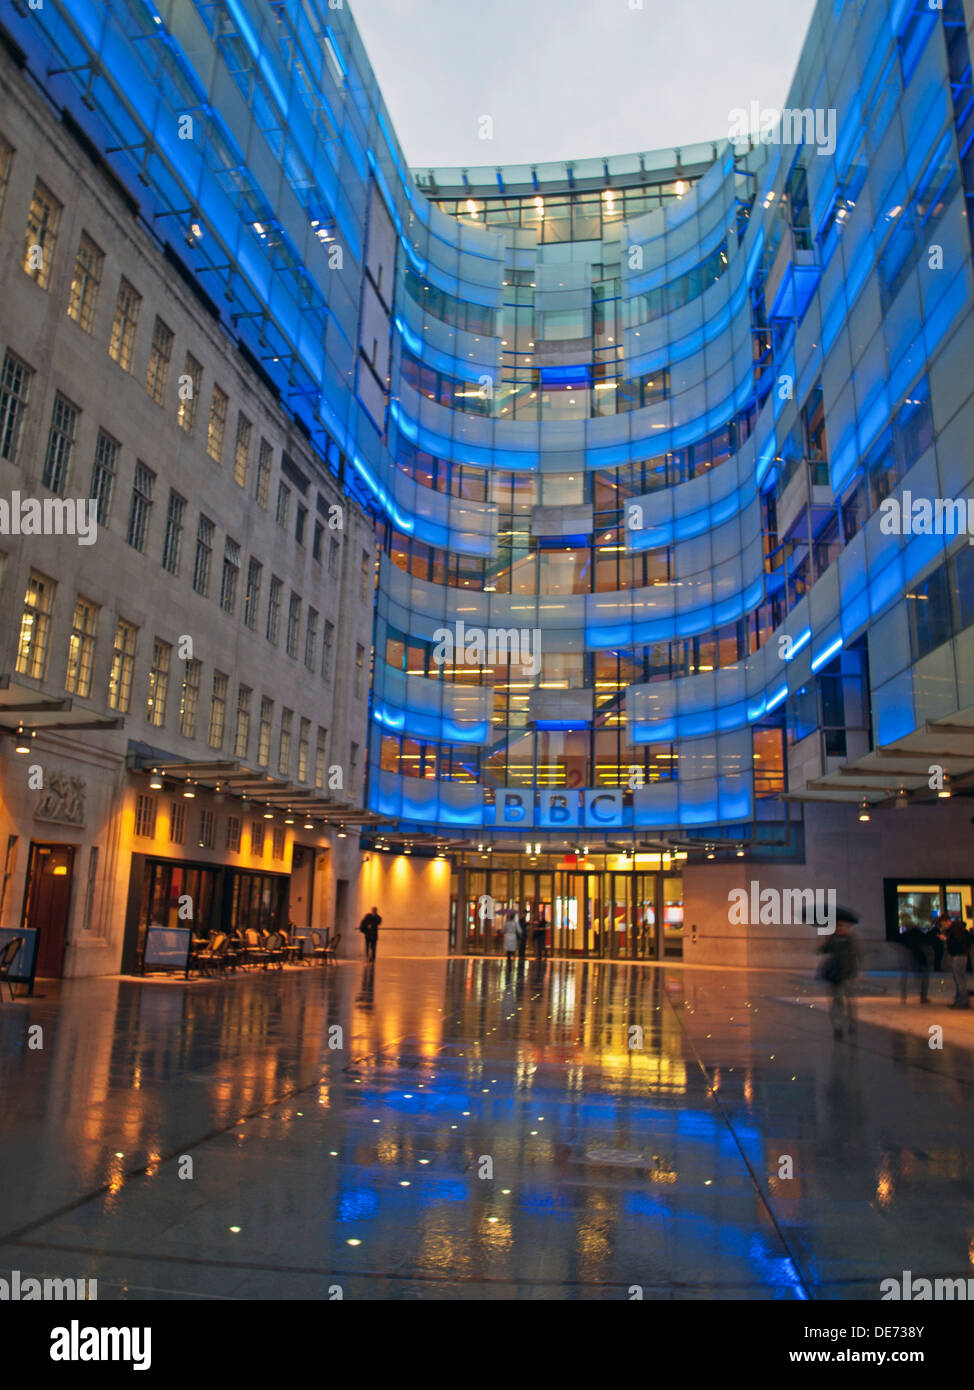 Illuminated view of the BBC Broadcasting House East Wing, Langham Place, City of Westminster, London, England, United Kingdom Stock Photo